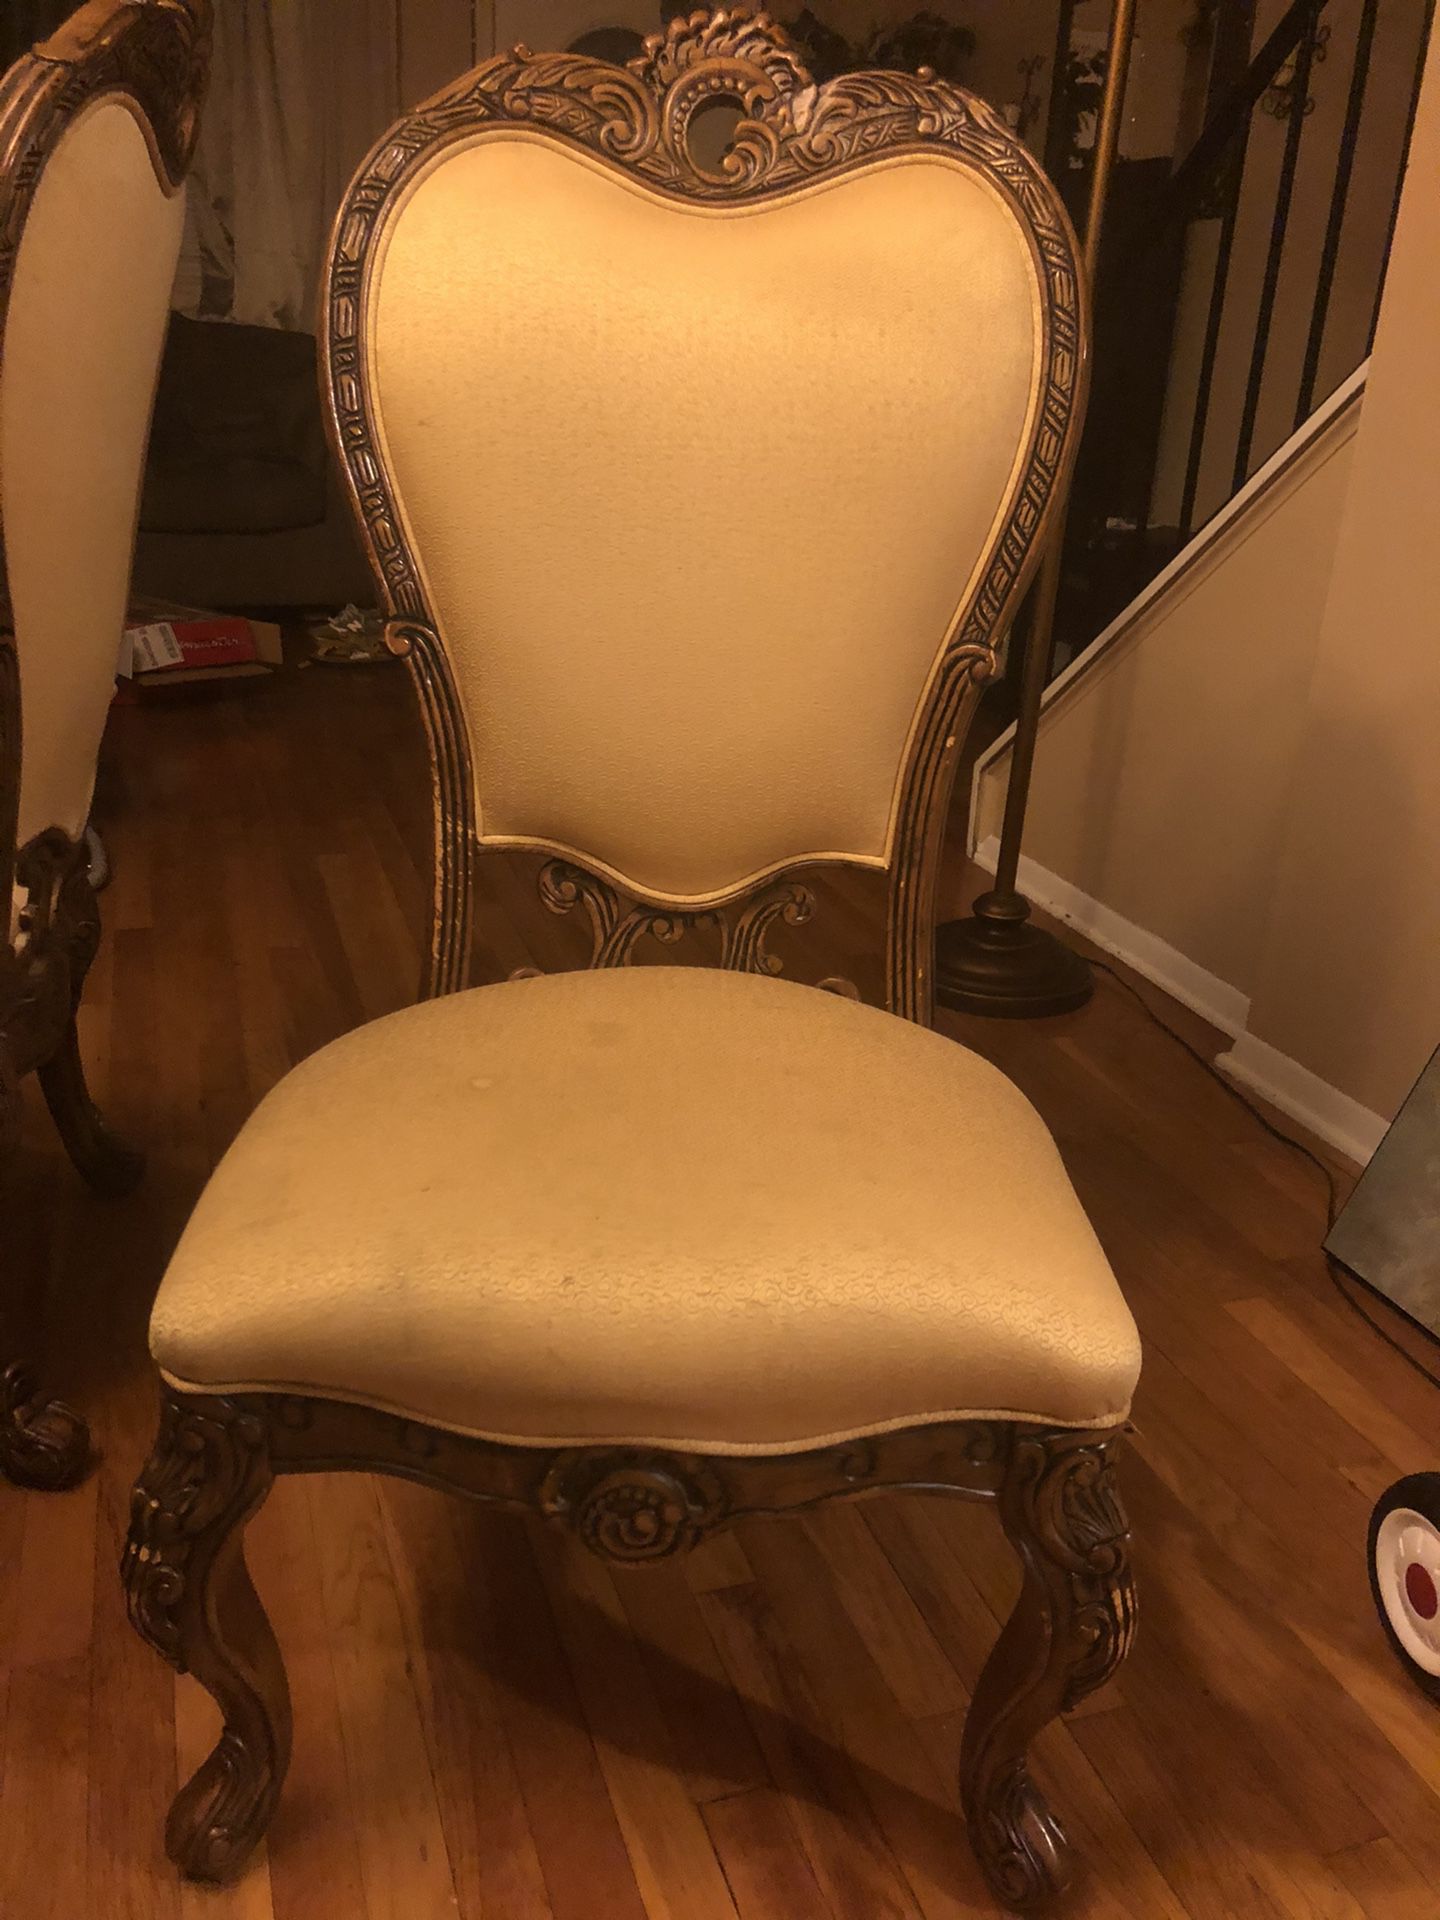 1-4 Chairs (Dining Room)